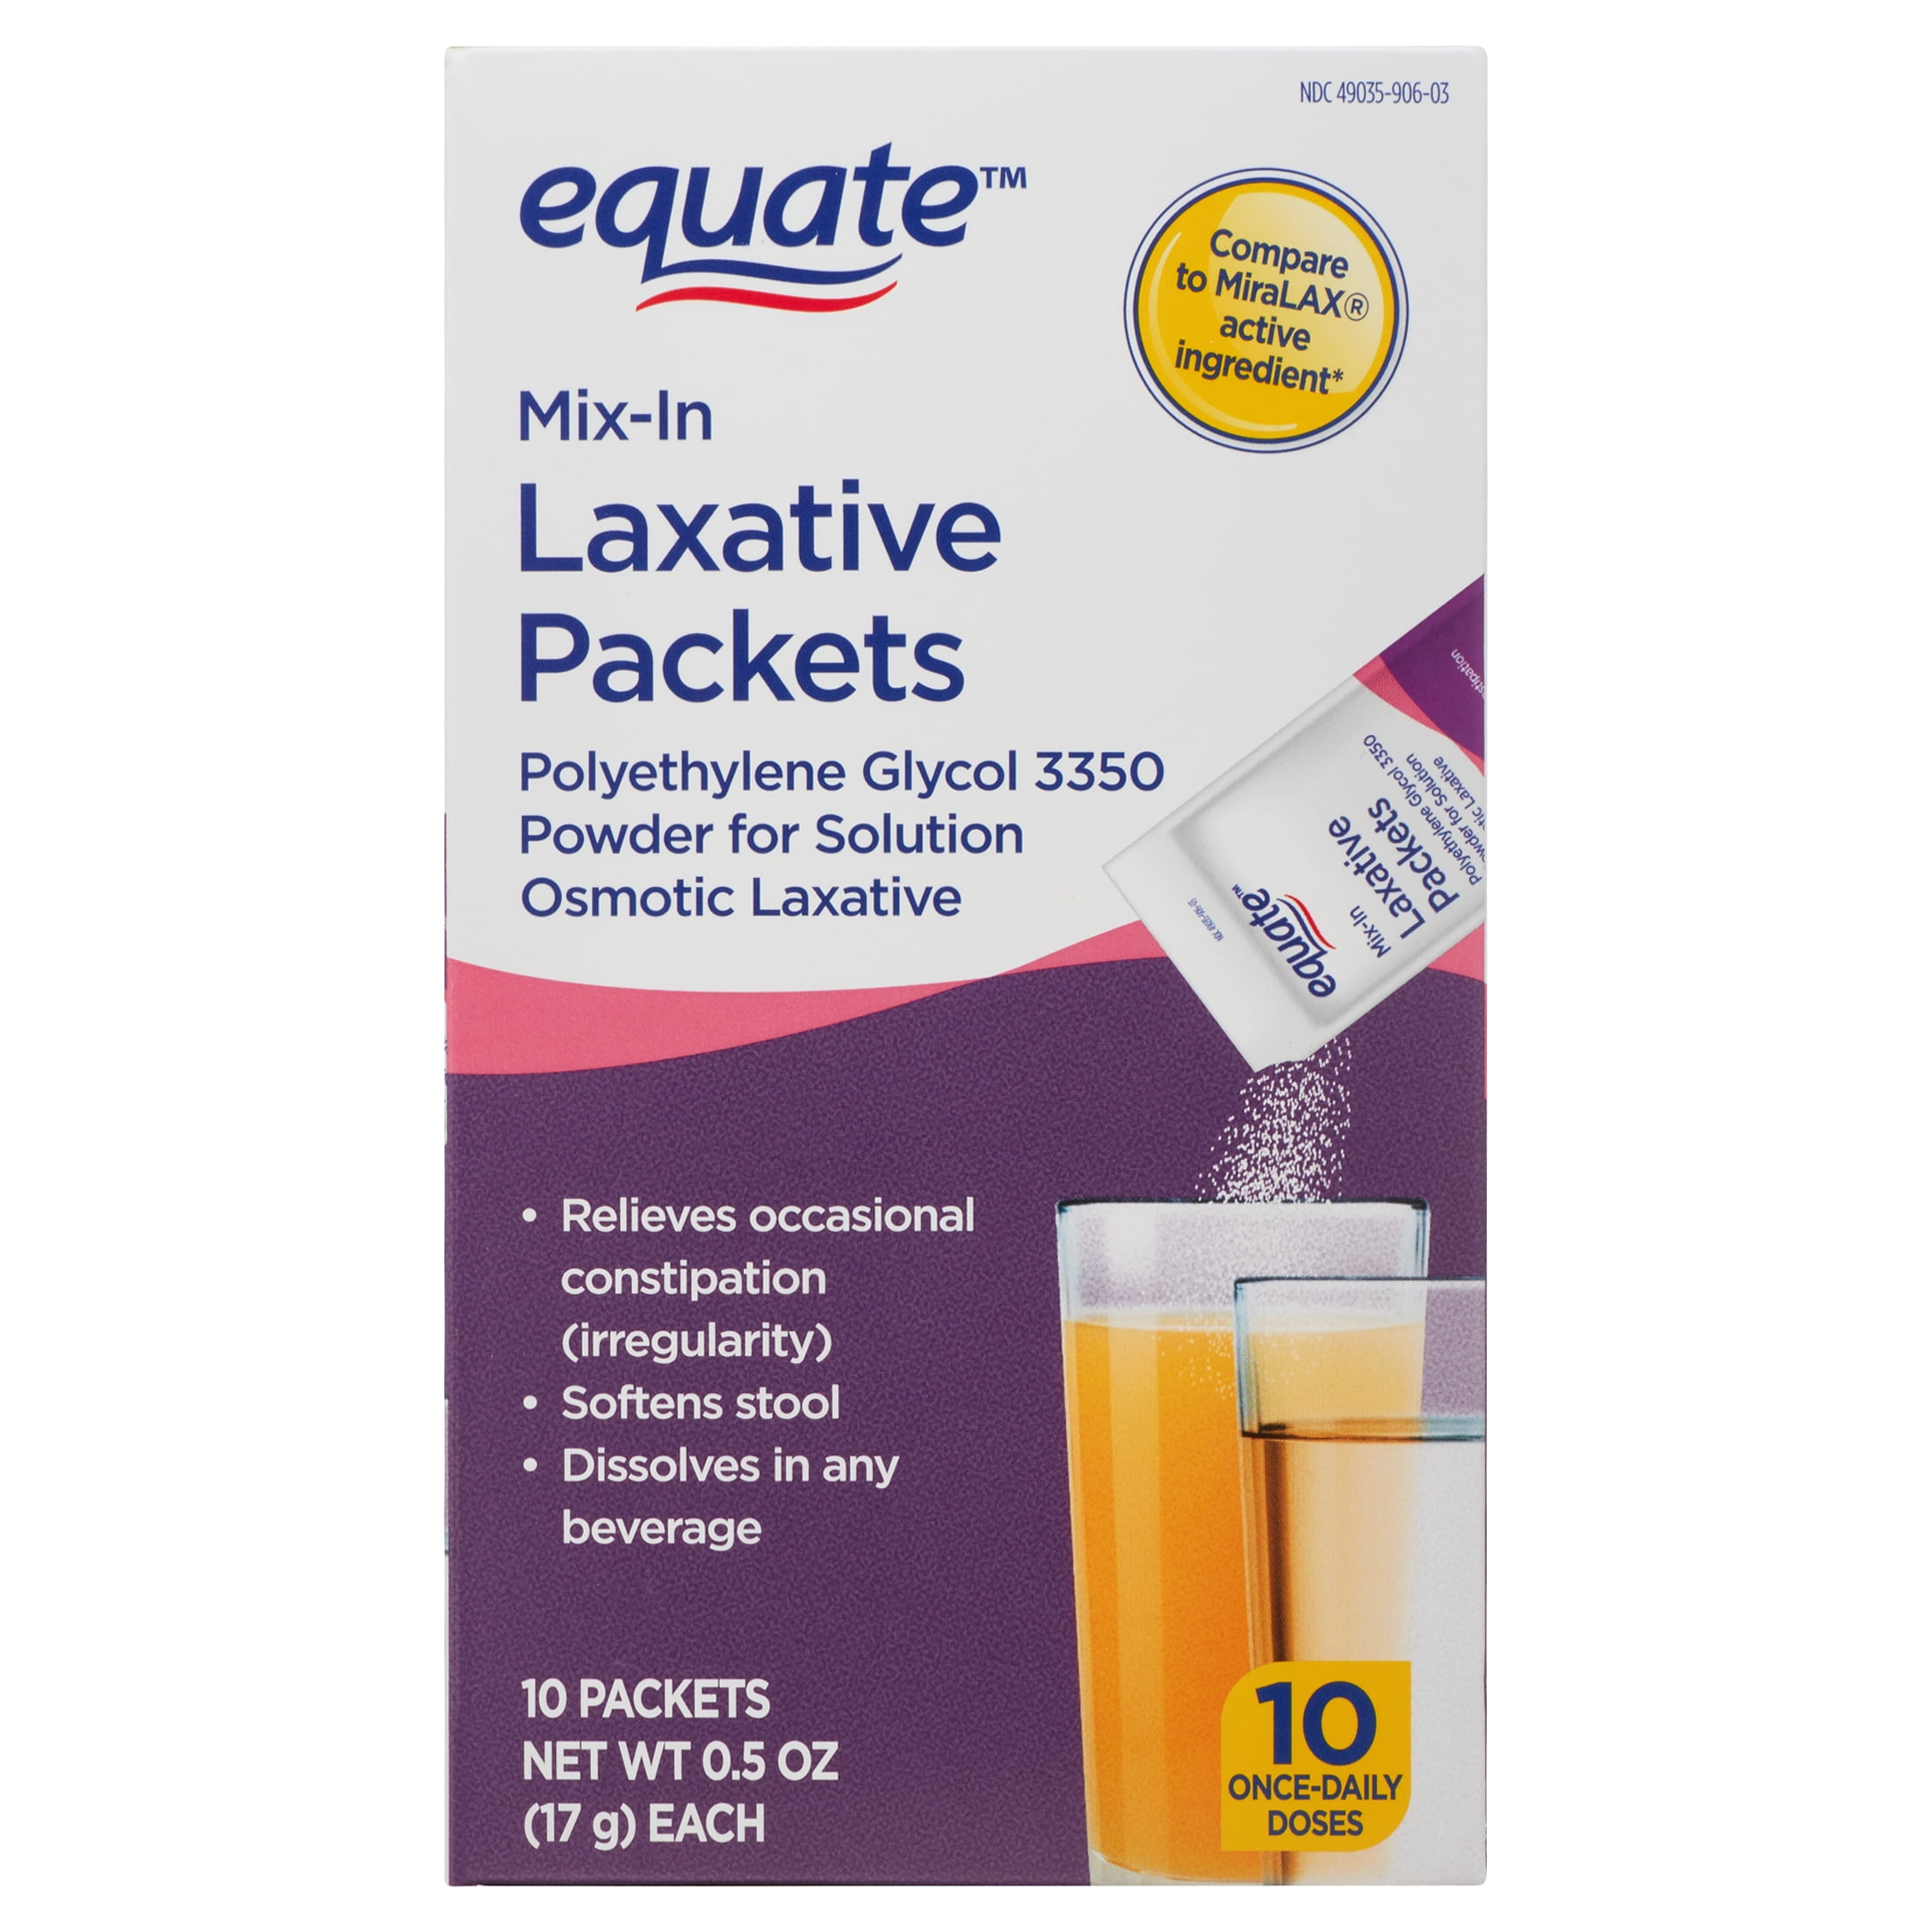 Equate Polyethylene Glycol 3350 Mix-In Laxative Packets, 10 Count